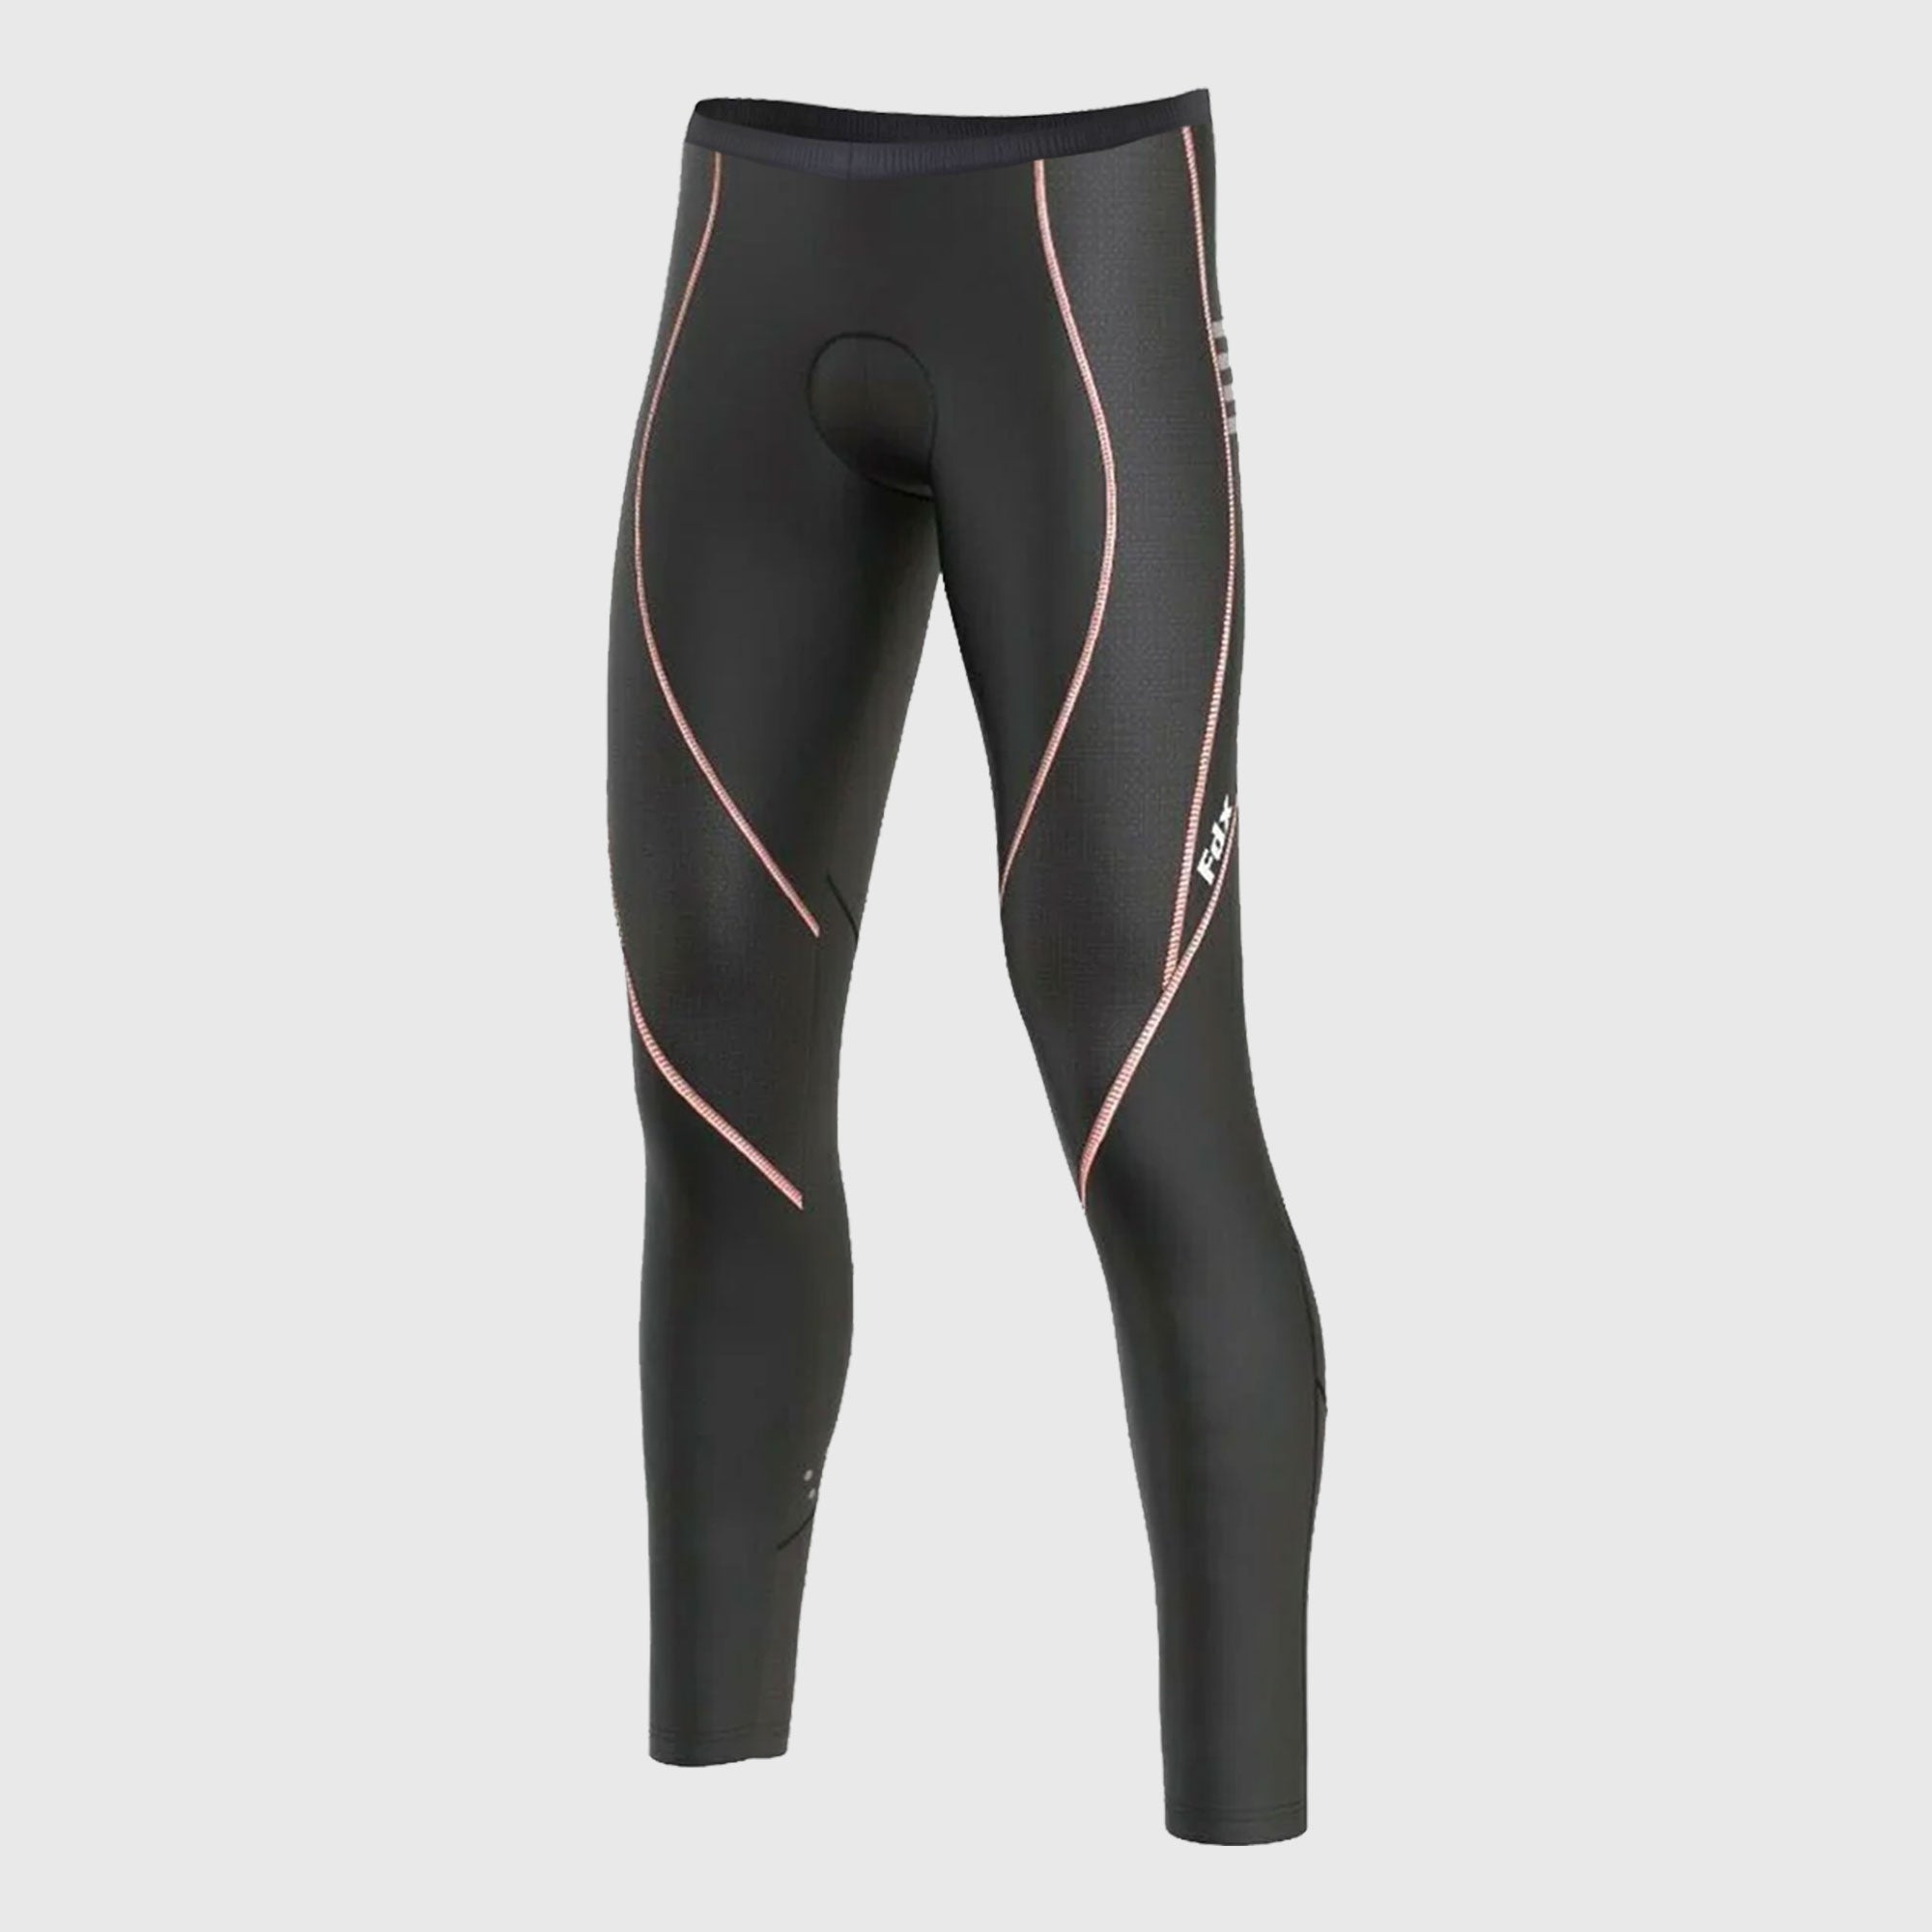 Mens Quick Dry Ski Thermal Compression Set With Thermal Tights, Thermal  Running Leggings, And Basketball Suit Z0224 From Make08, $20.49